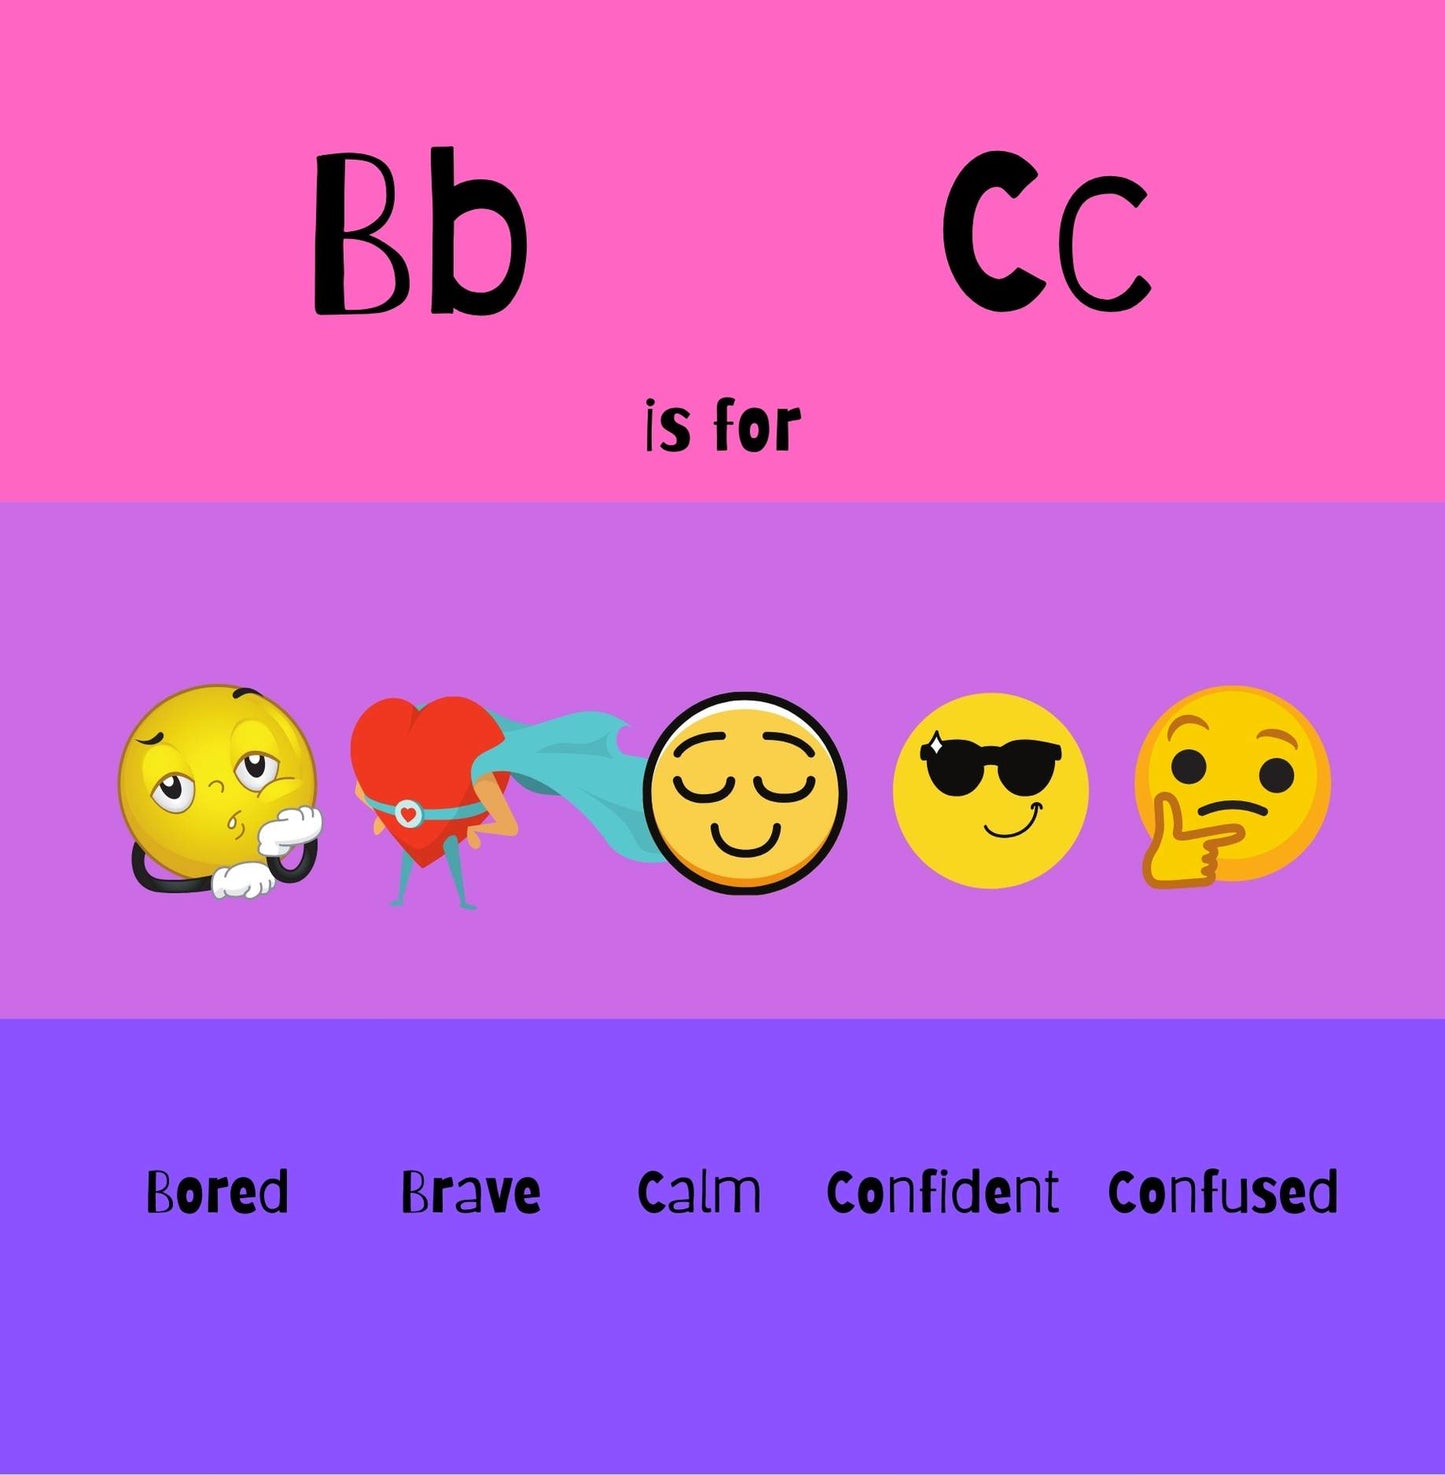 ABC's of Emotions- PREORDER